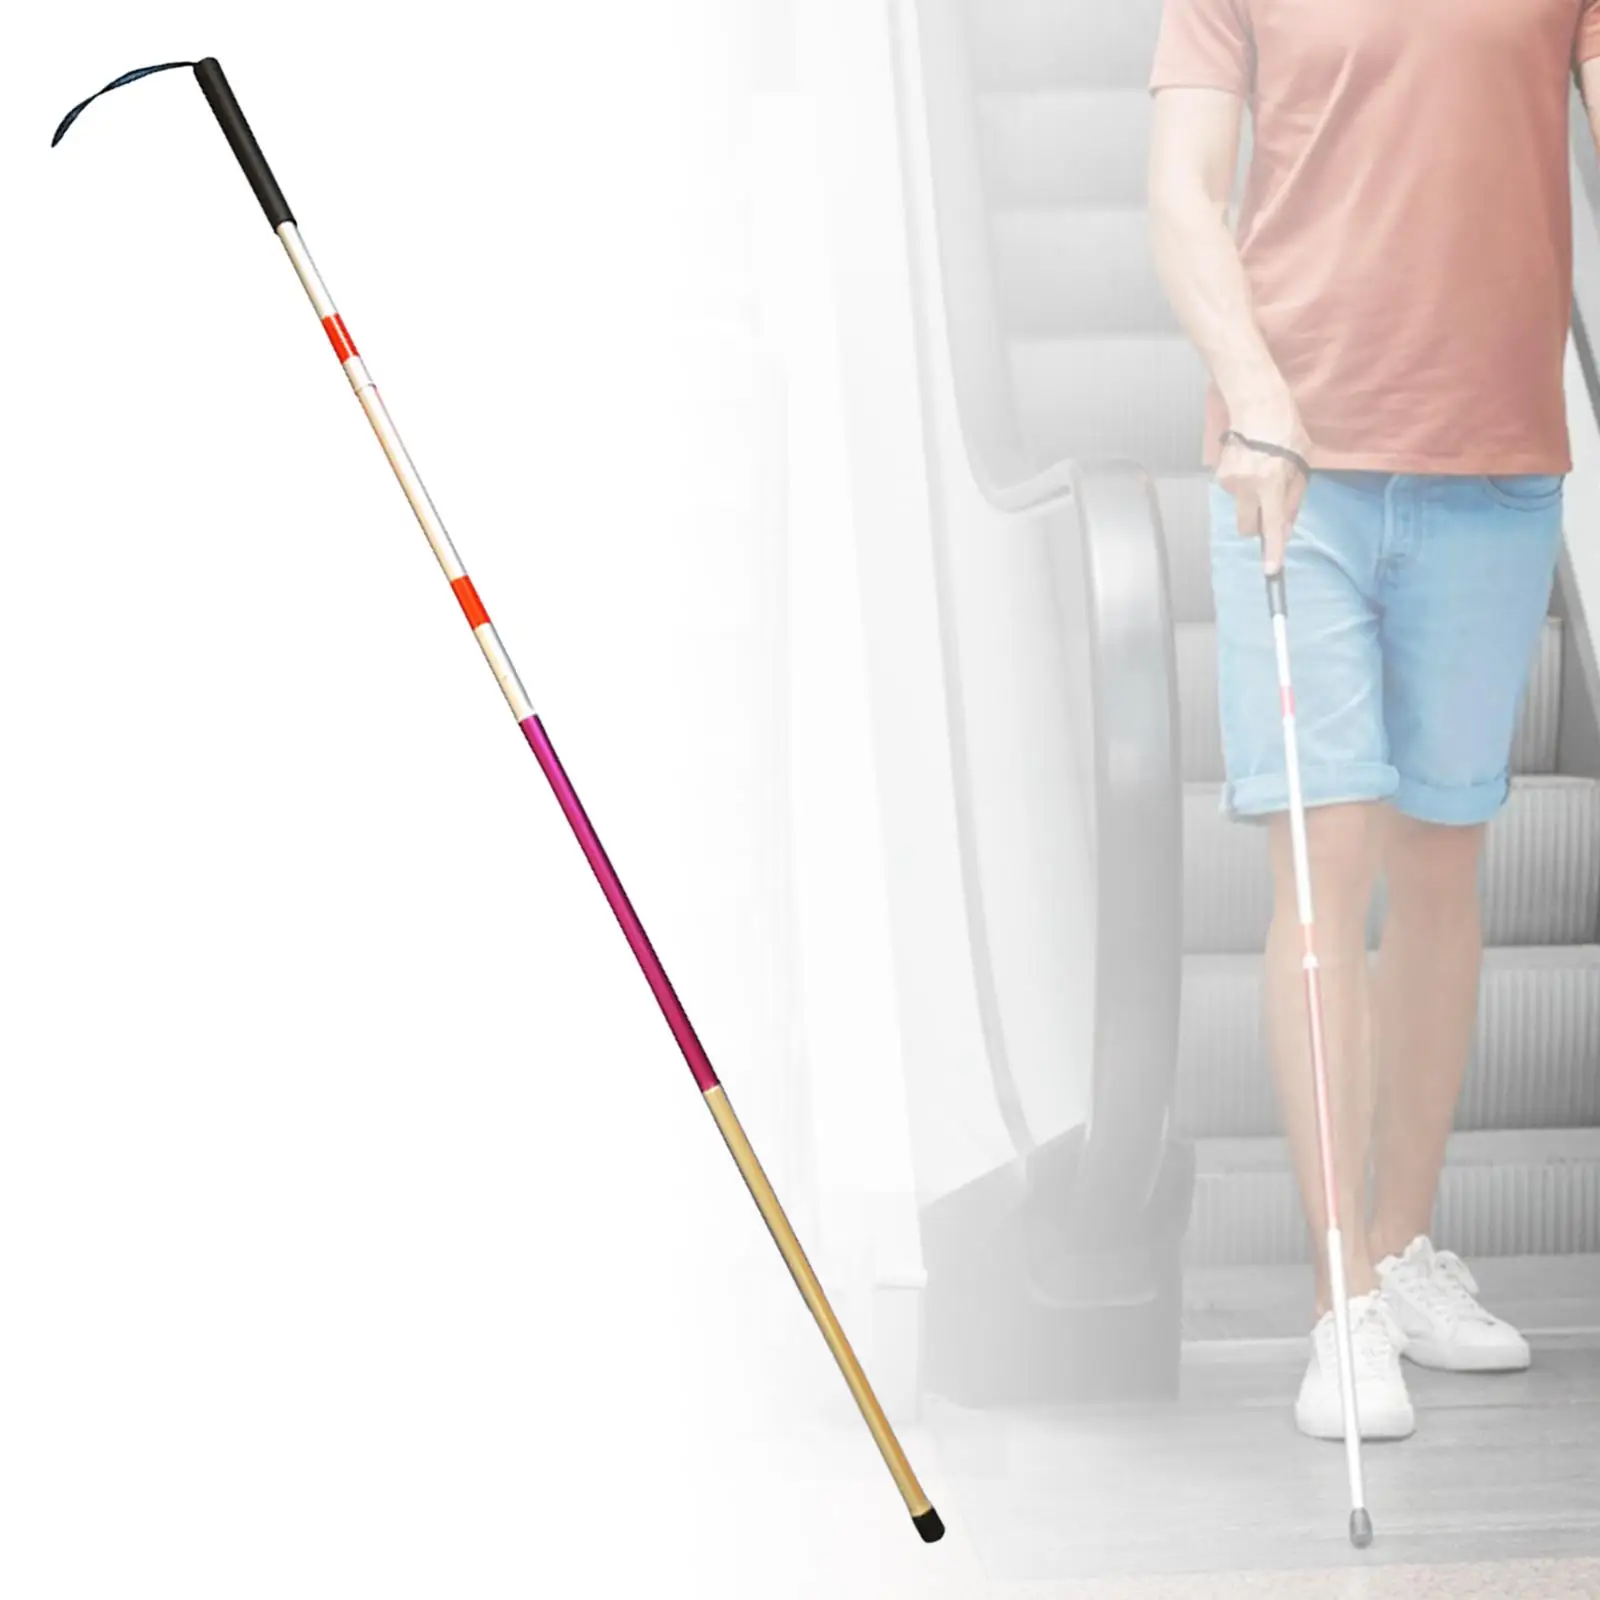 Portable Folding Mobility Cane Reflective Balancing Mobility Aid Lightweight 4 Section Walking Stick for Blind Vision Impaired